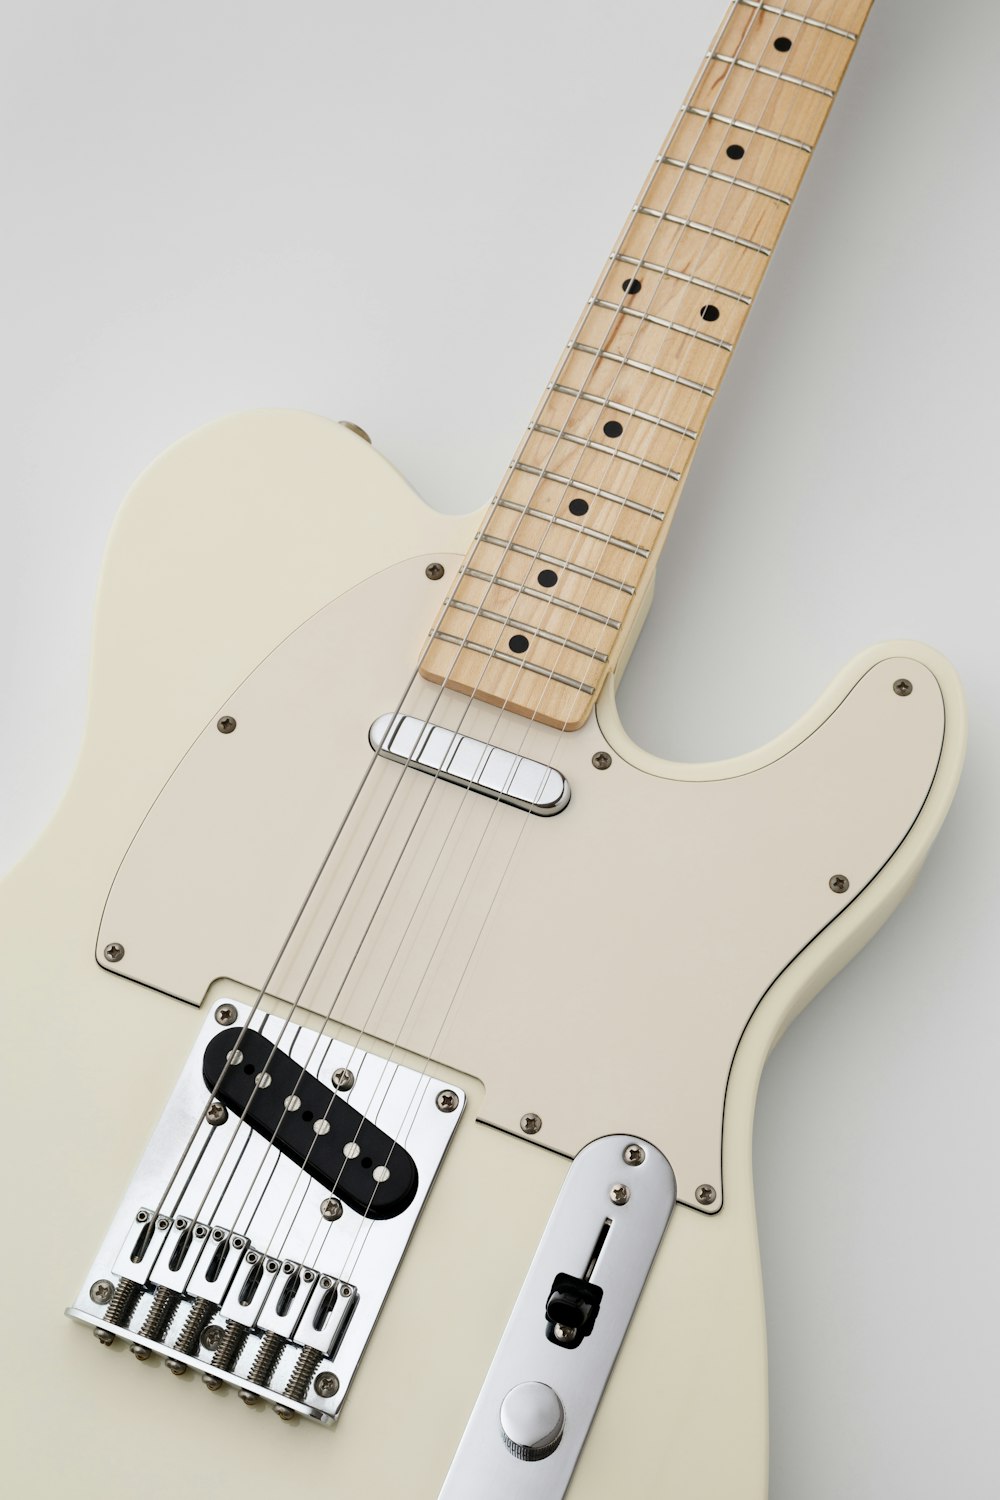 an electric guitar with a white body and neck